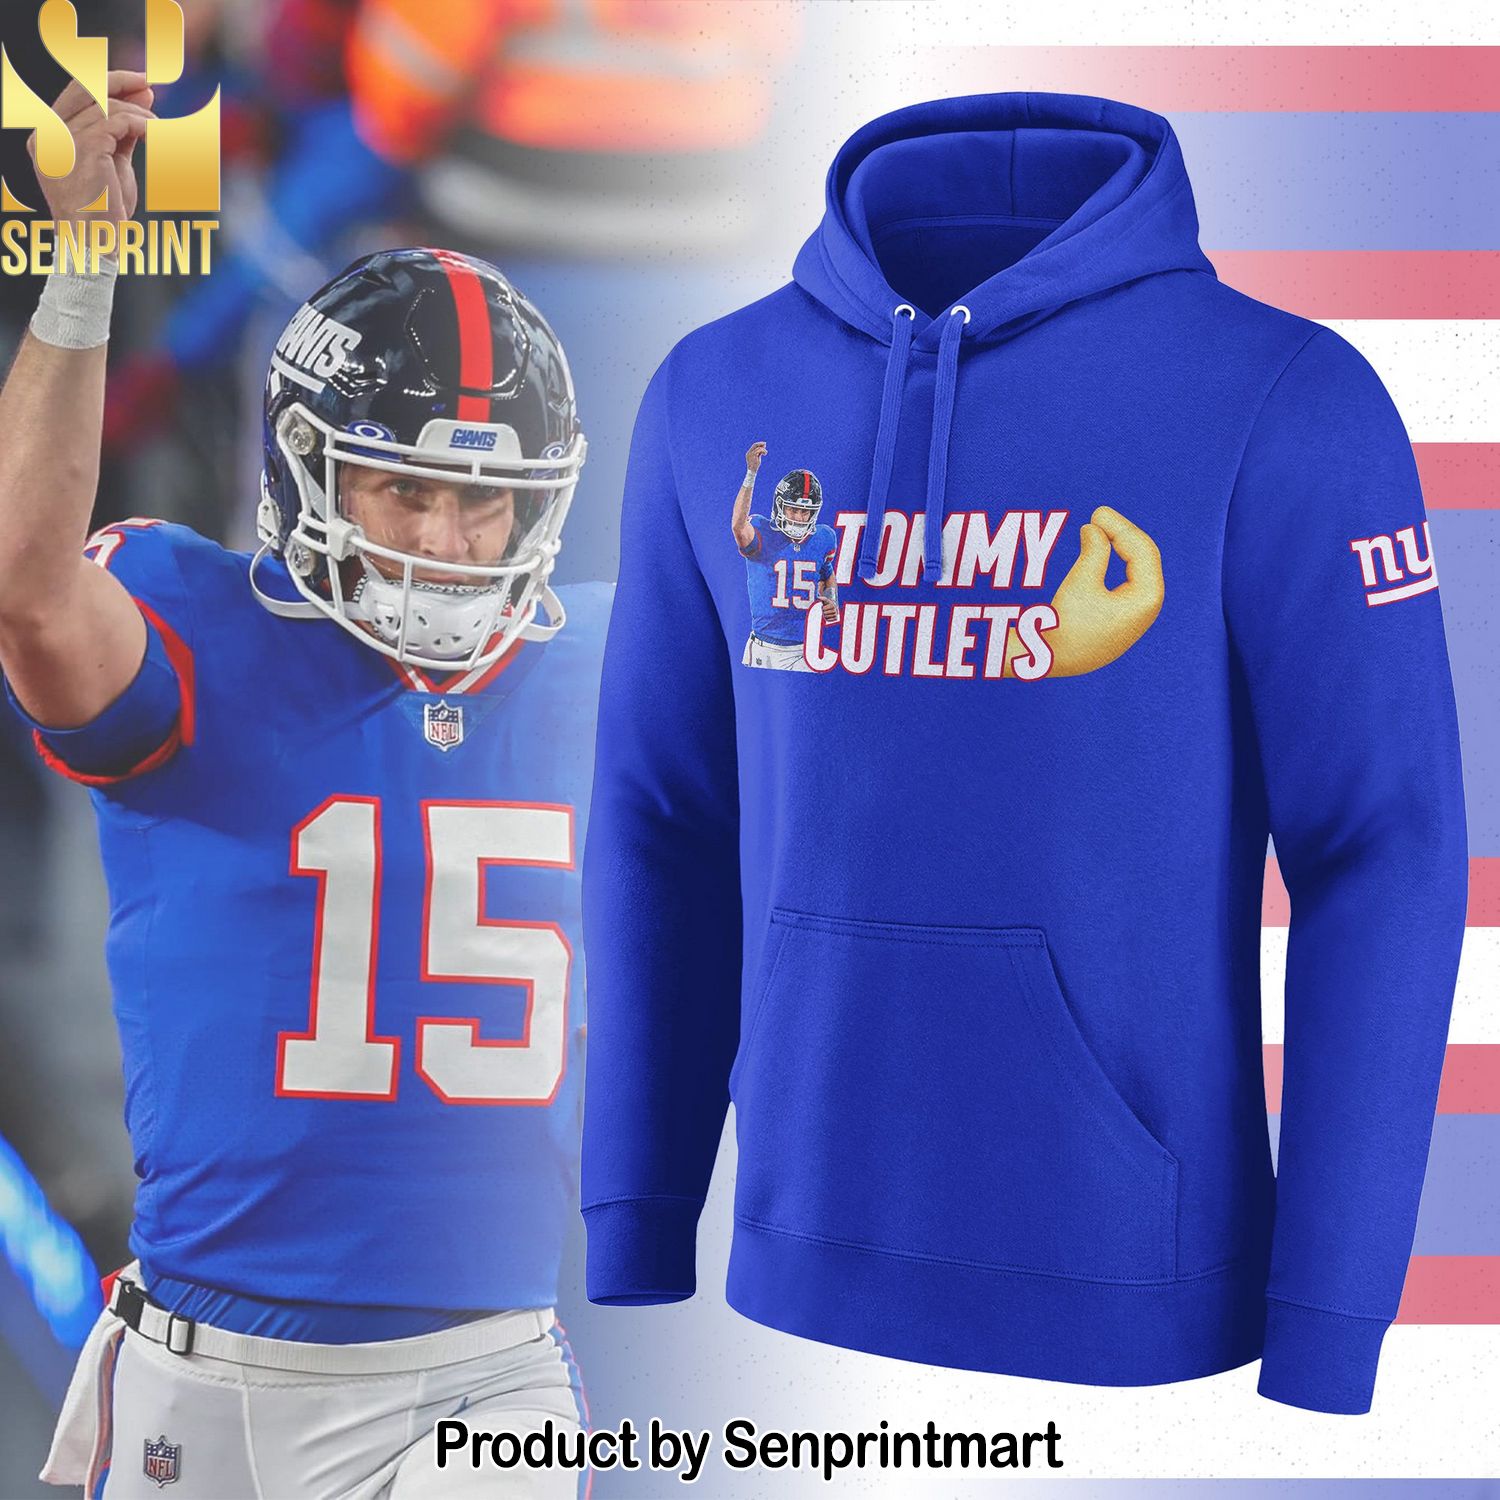 NFL New York Giants Tommy Cutlets Shirt